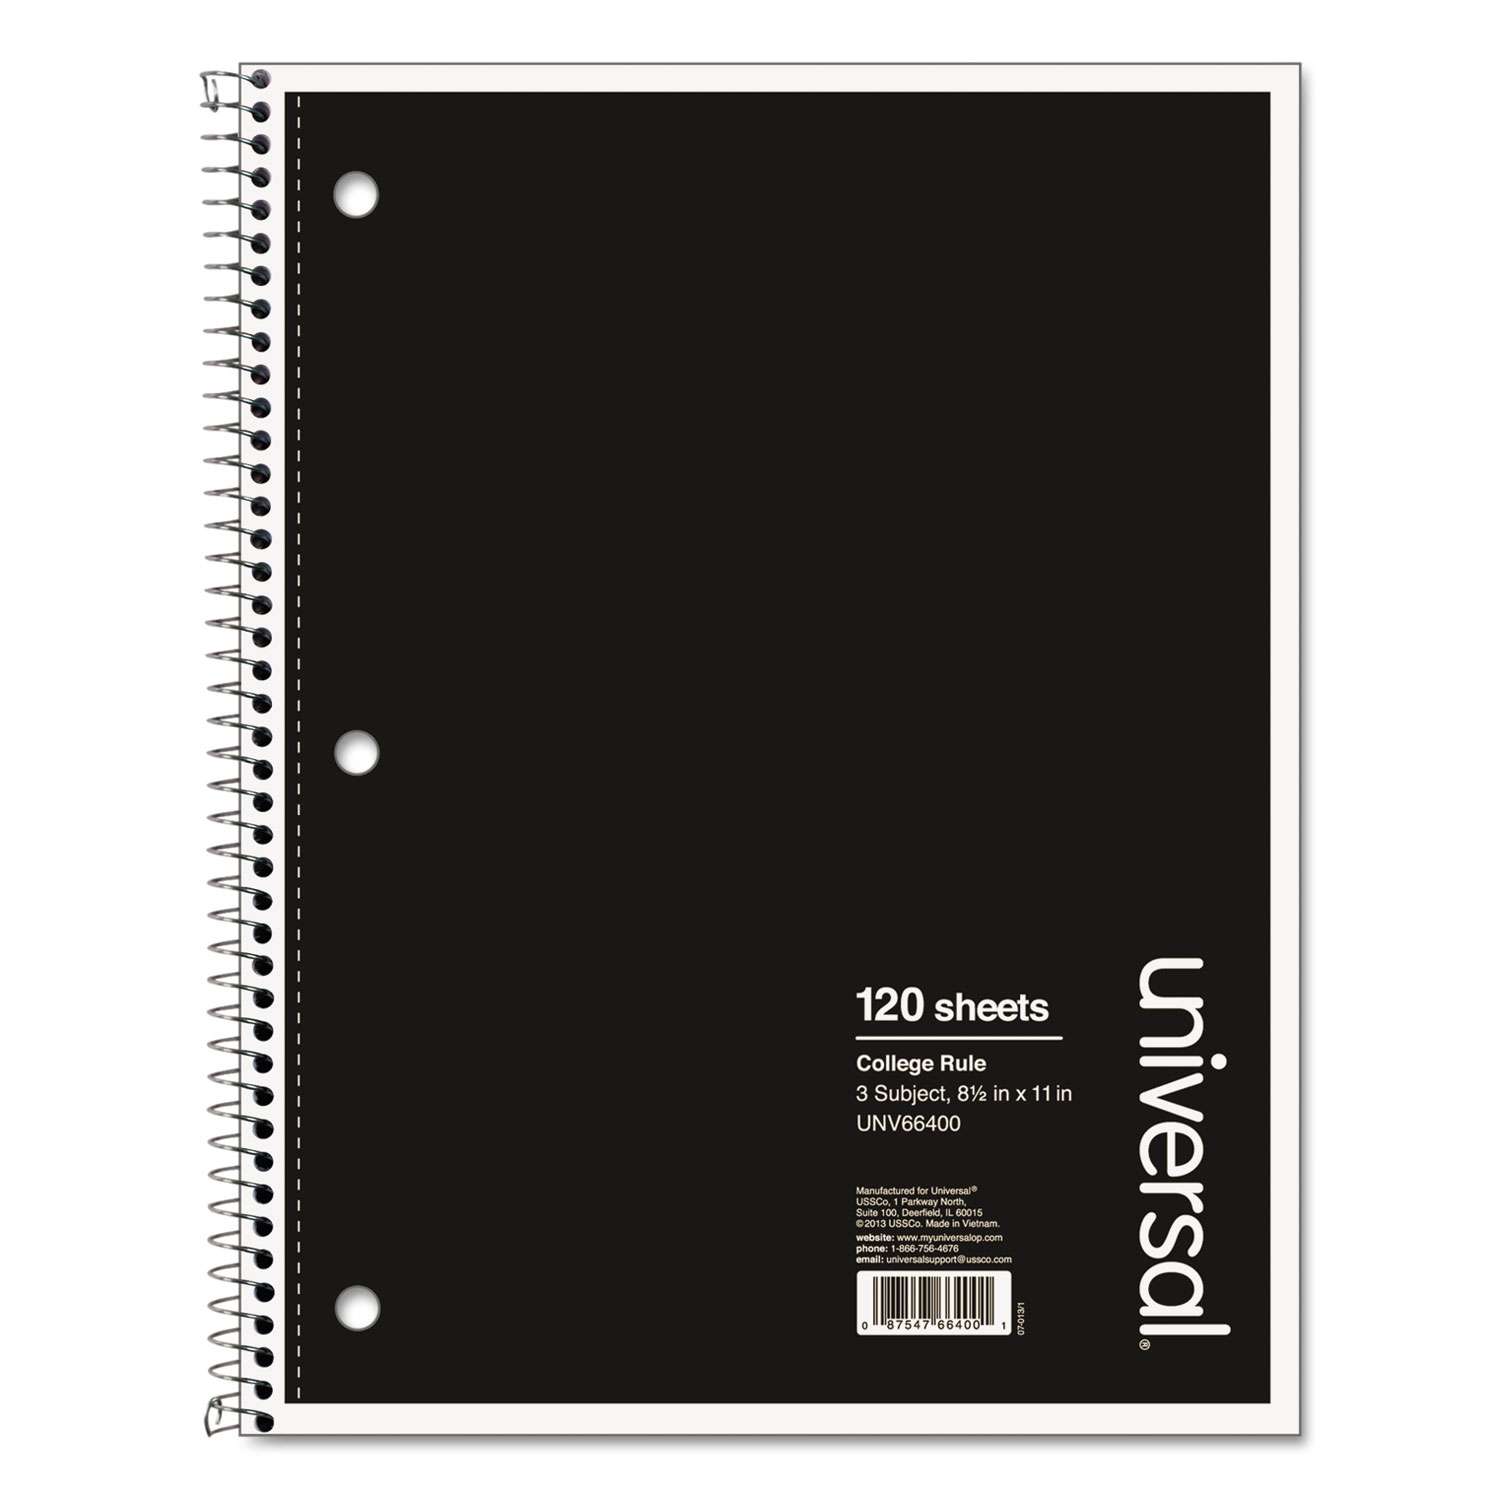  Universal UNV66400 Wirebound Notebook, 3 Subjects, Medium/College Rule, Black Cover, 11 x 8.5, 120 Sheets (UNV66400) 